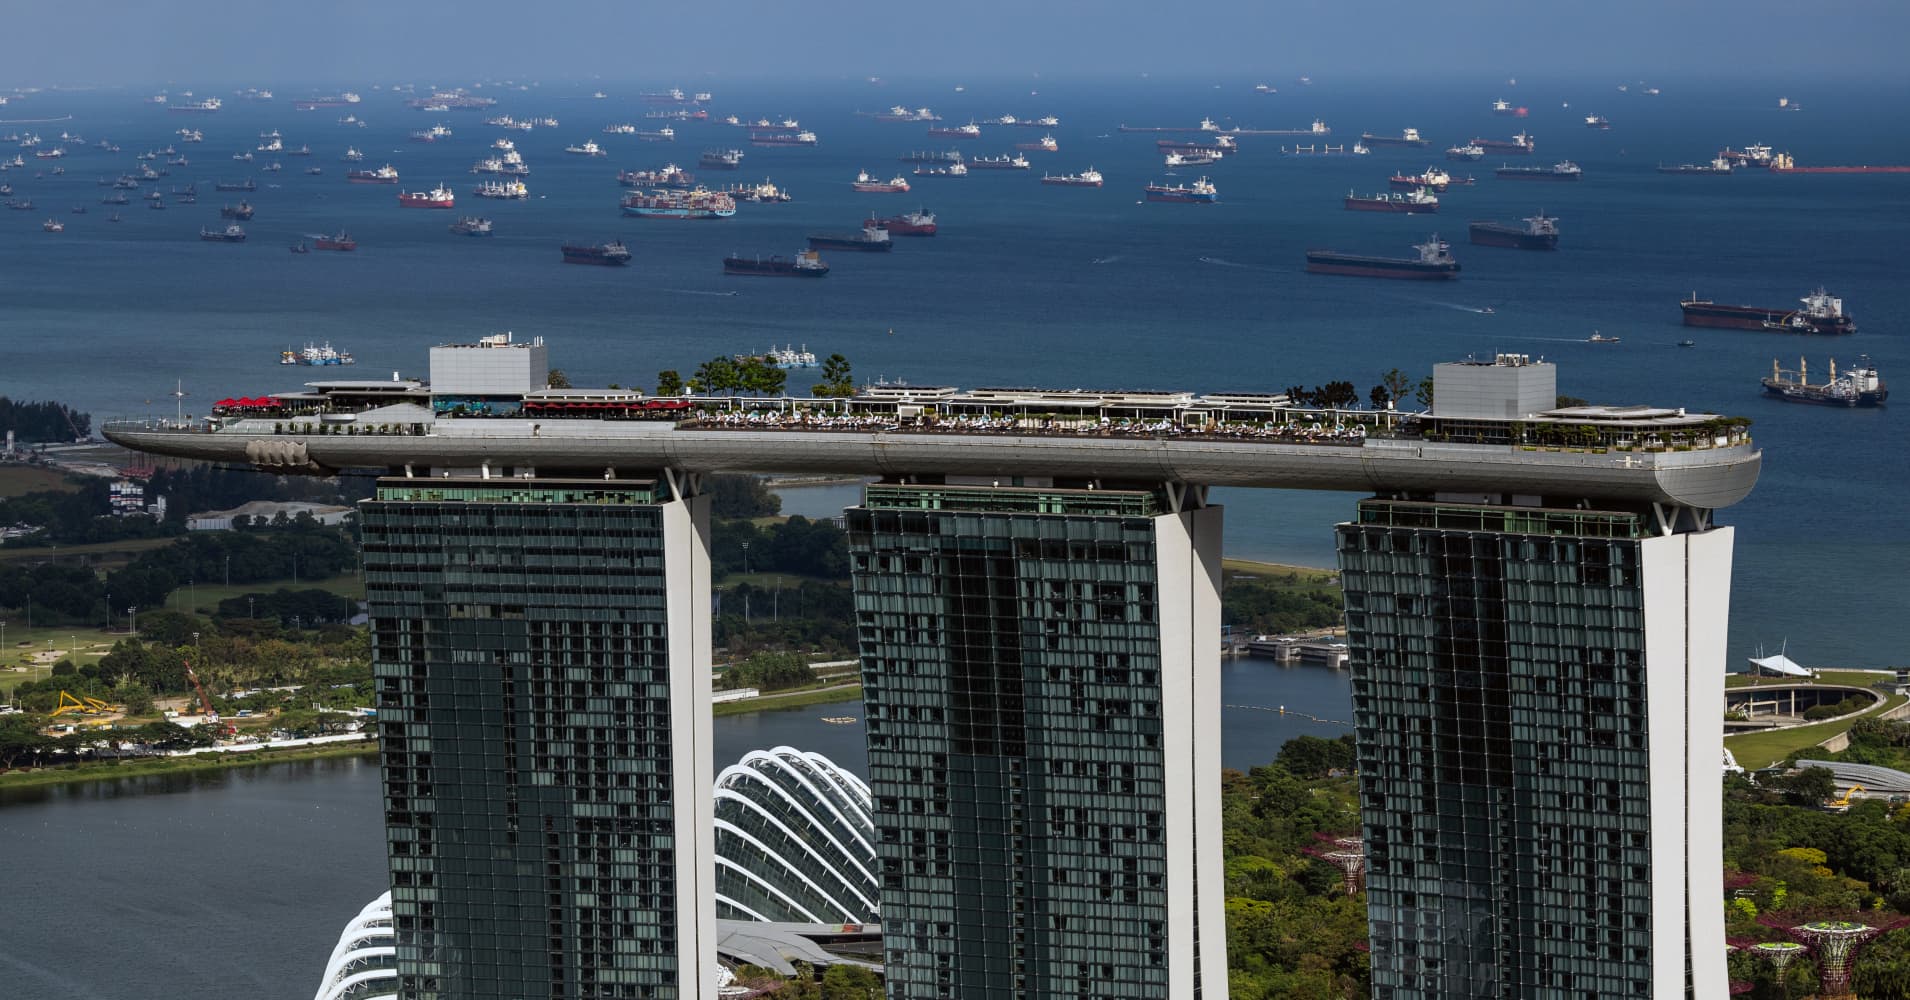 singapore non oil domestic exports plunge 20.7%, misses expectations by a huge margin